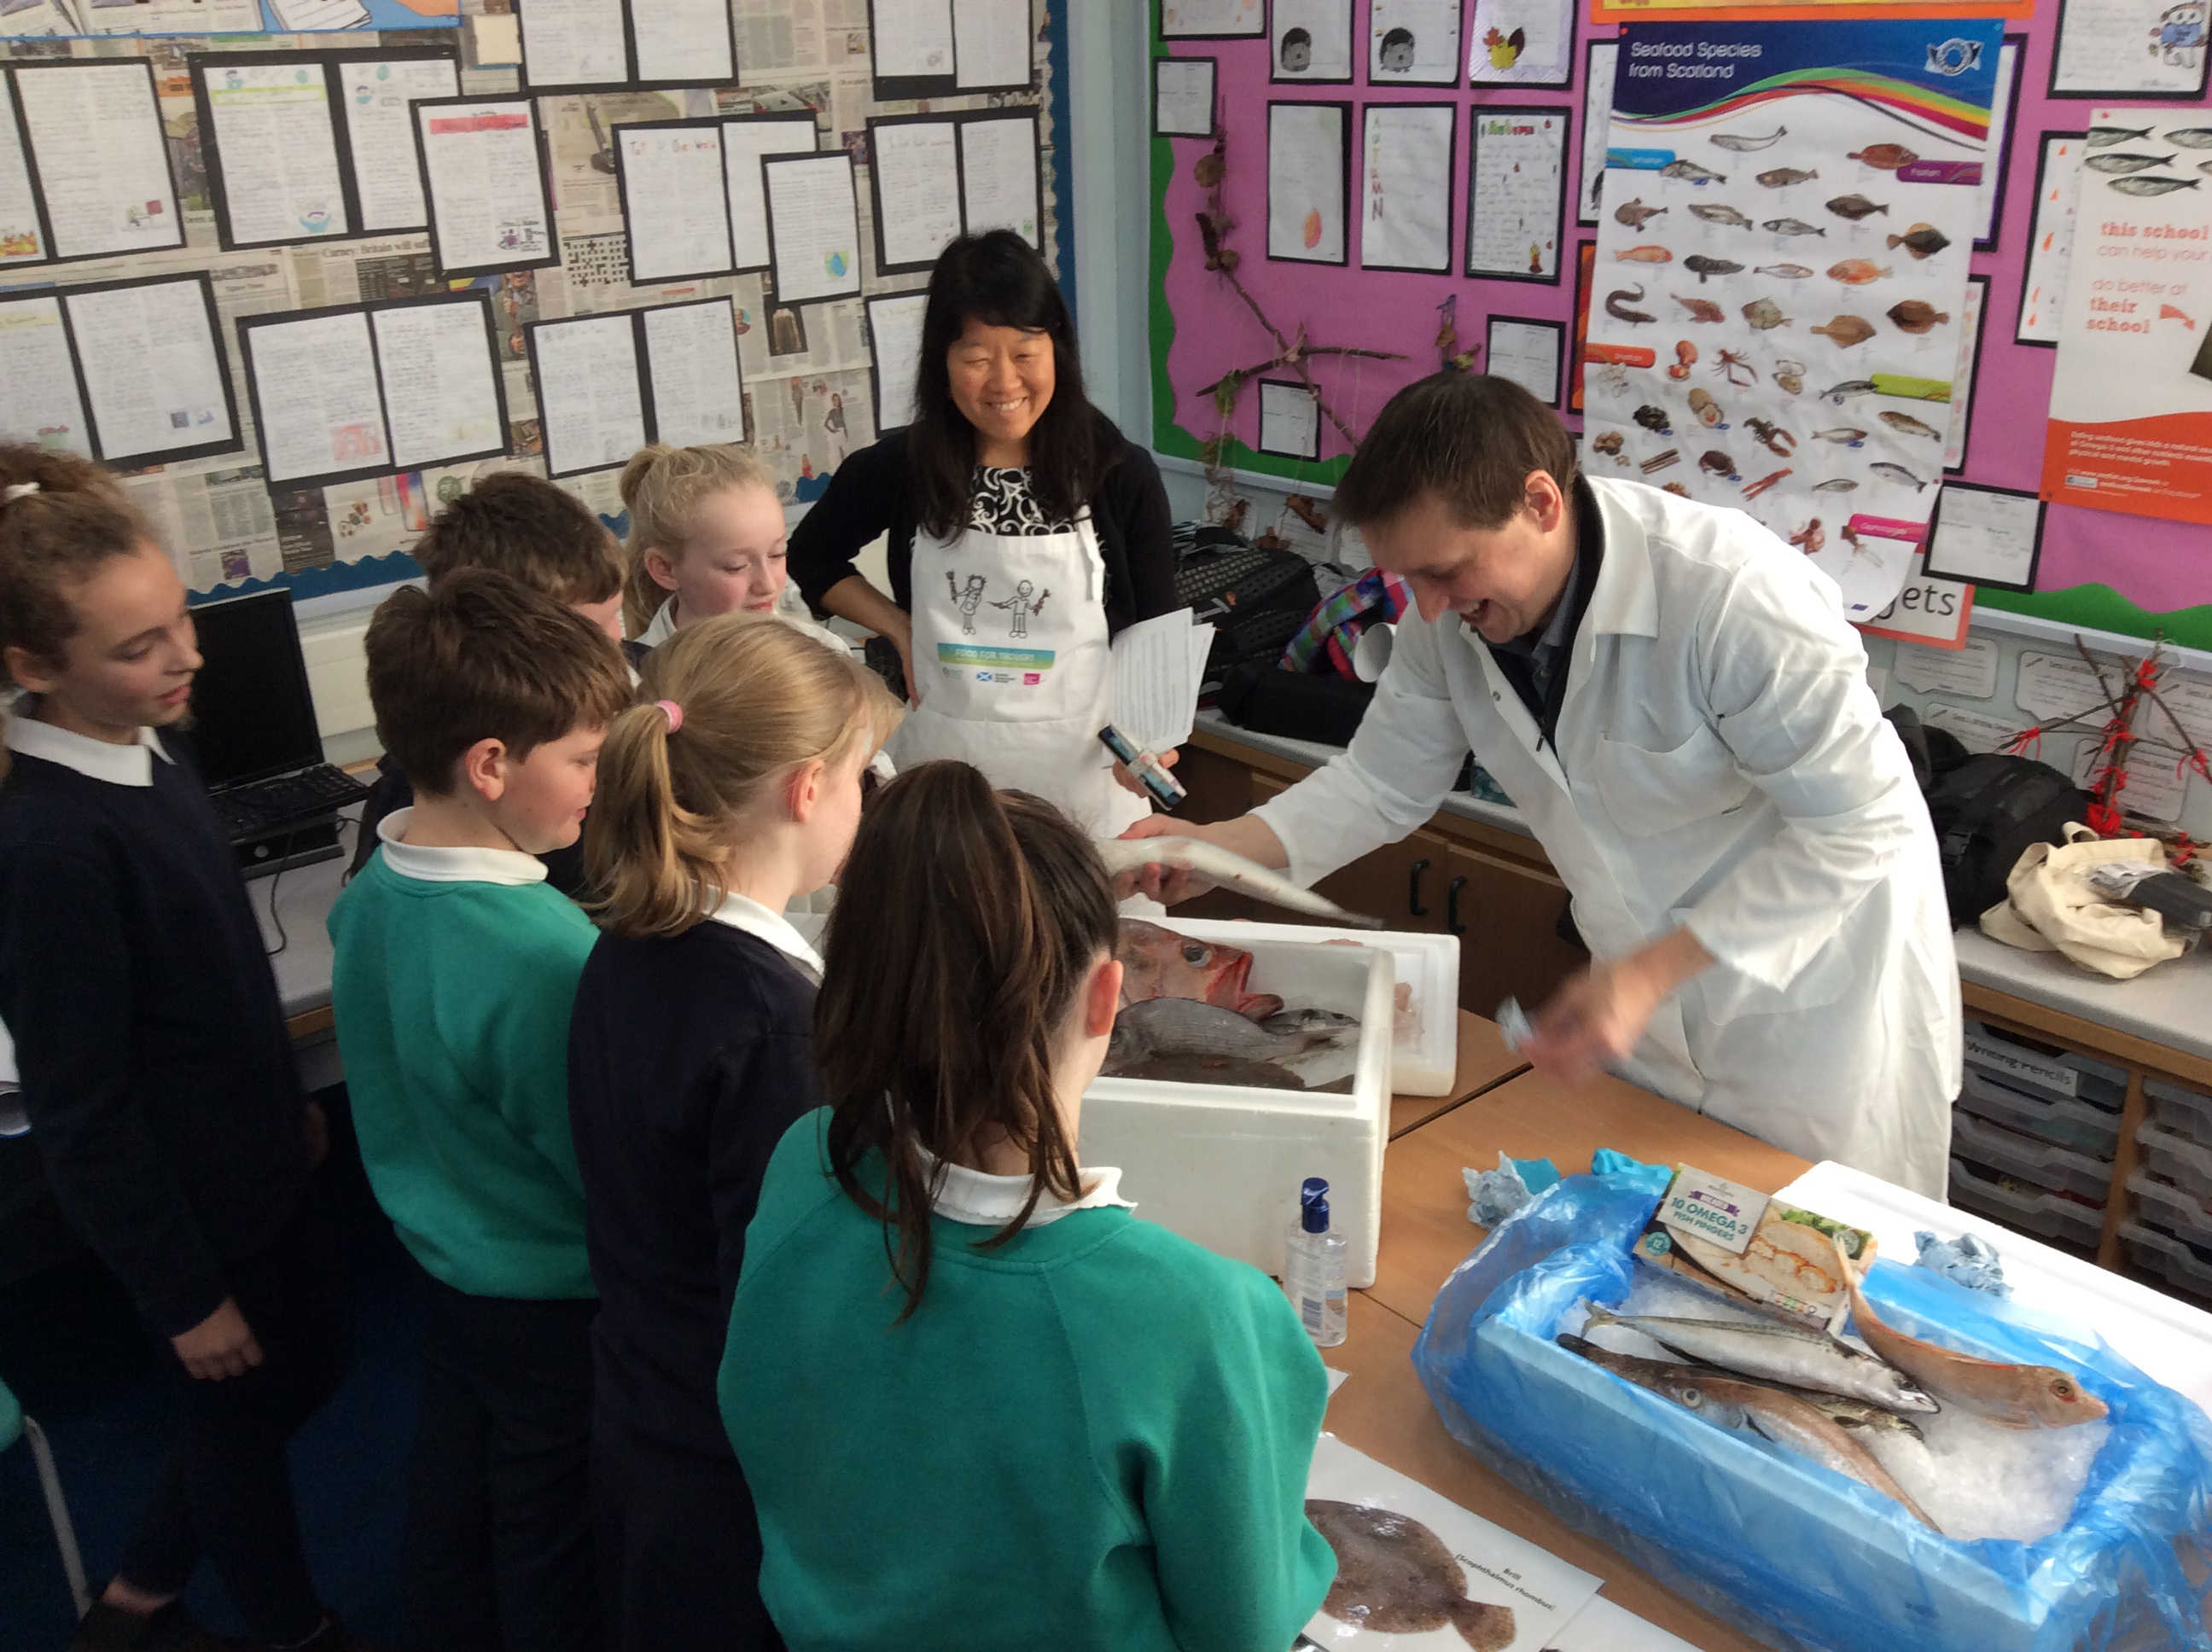 Primary school pupils from Balfron Primary School in Stirlingshire receive a hands-on lesson from Institute of Aquaculture staff